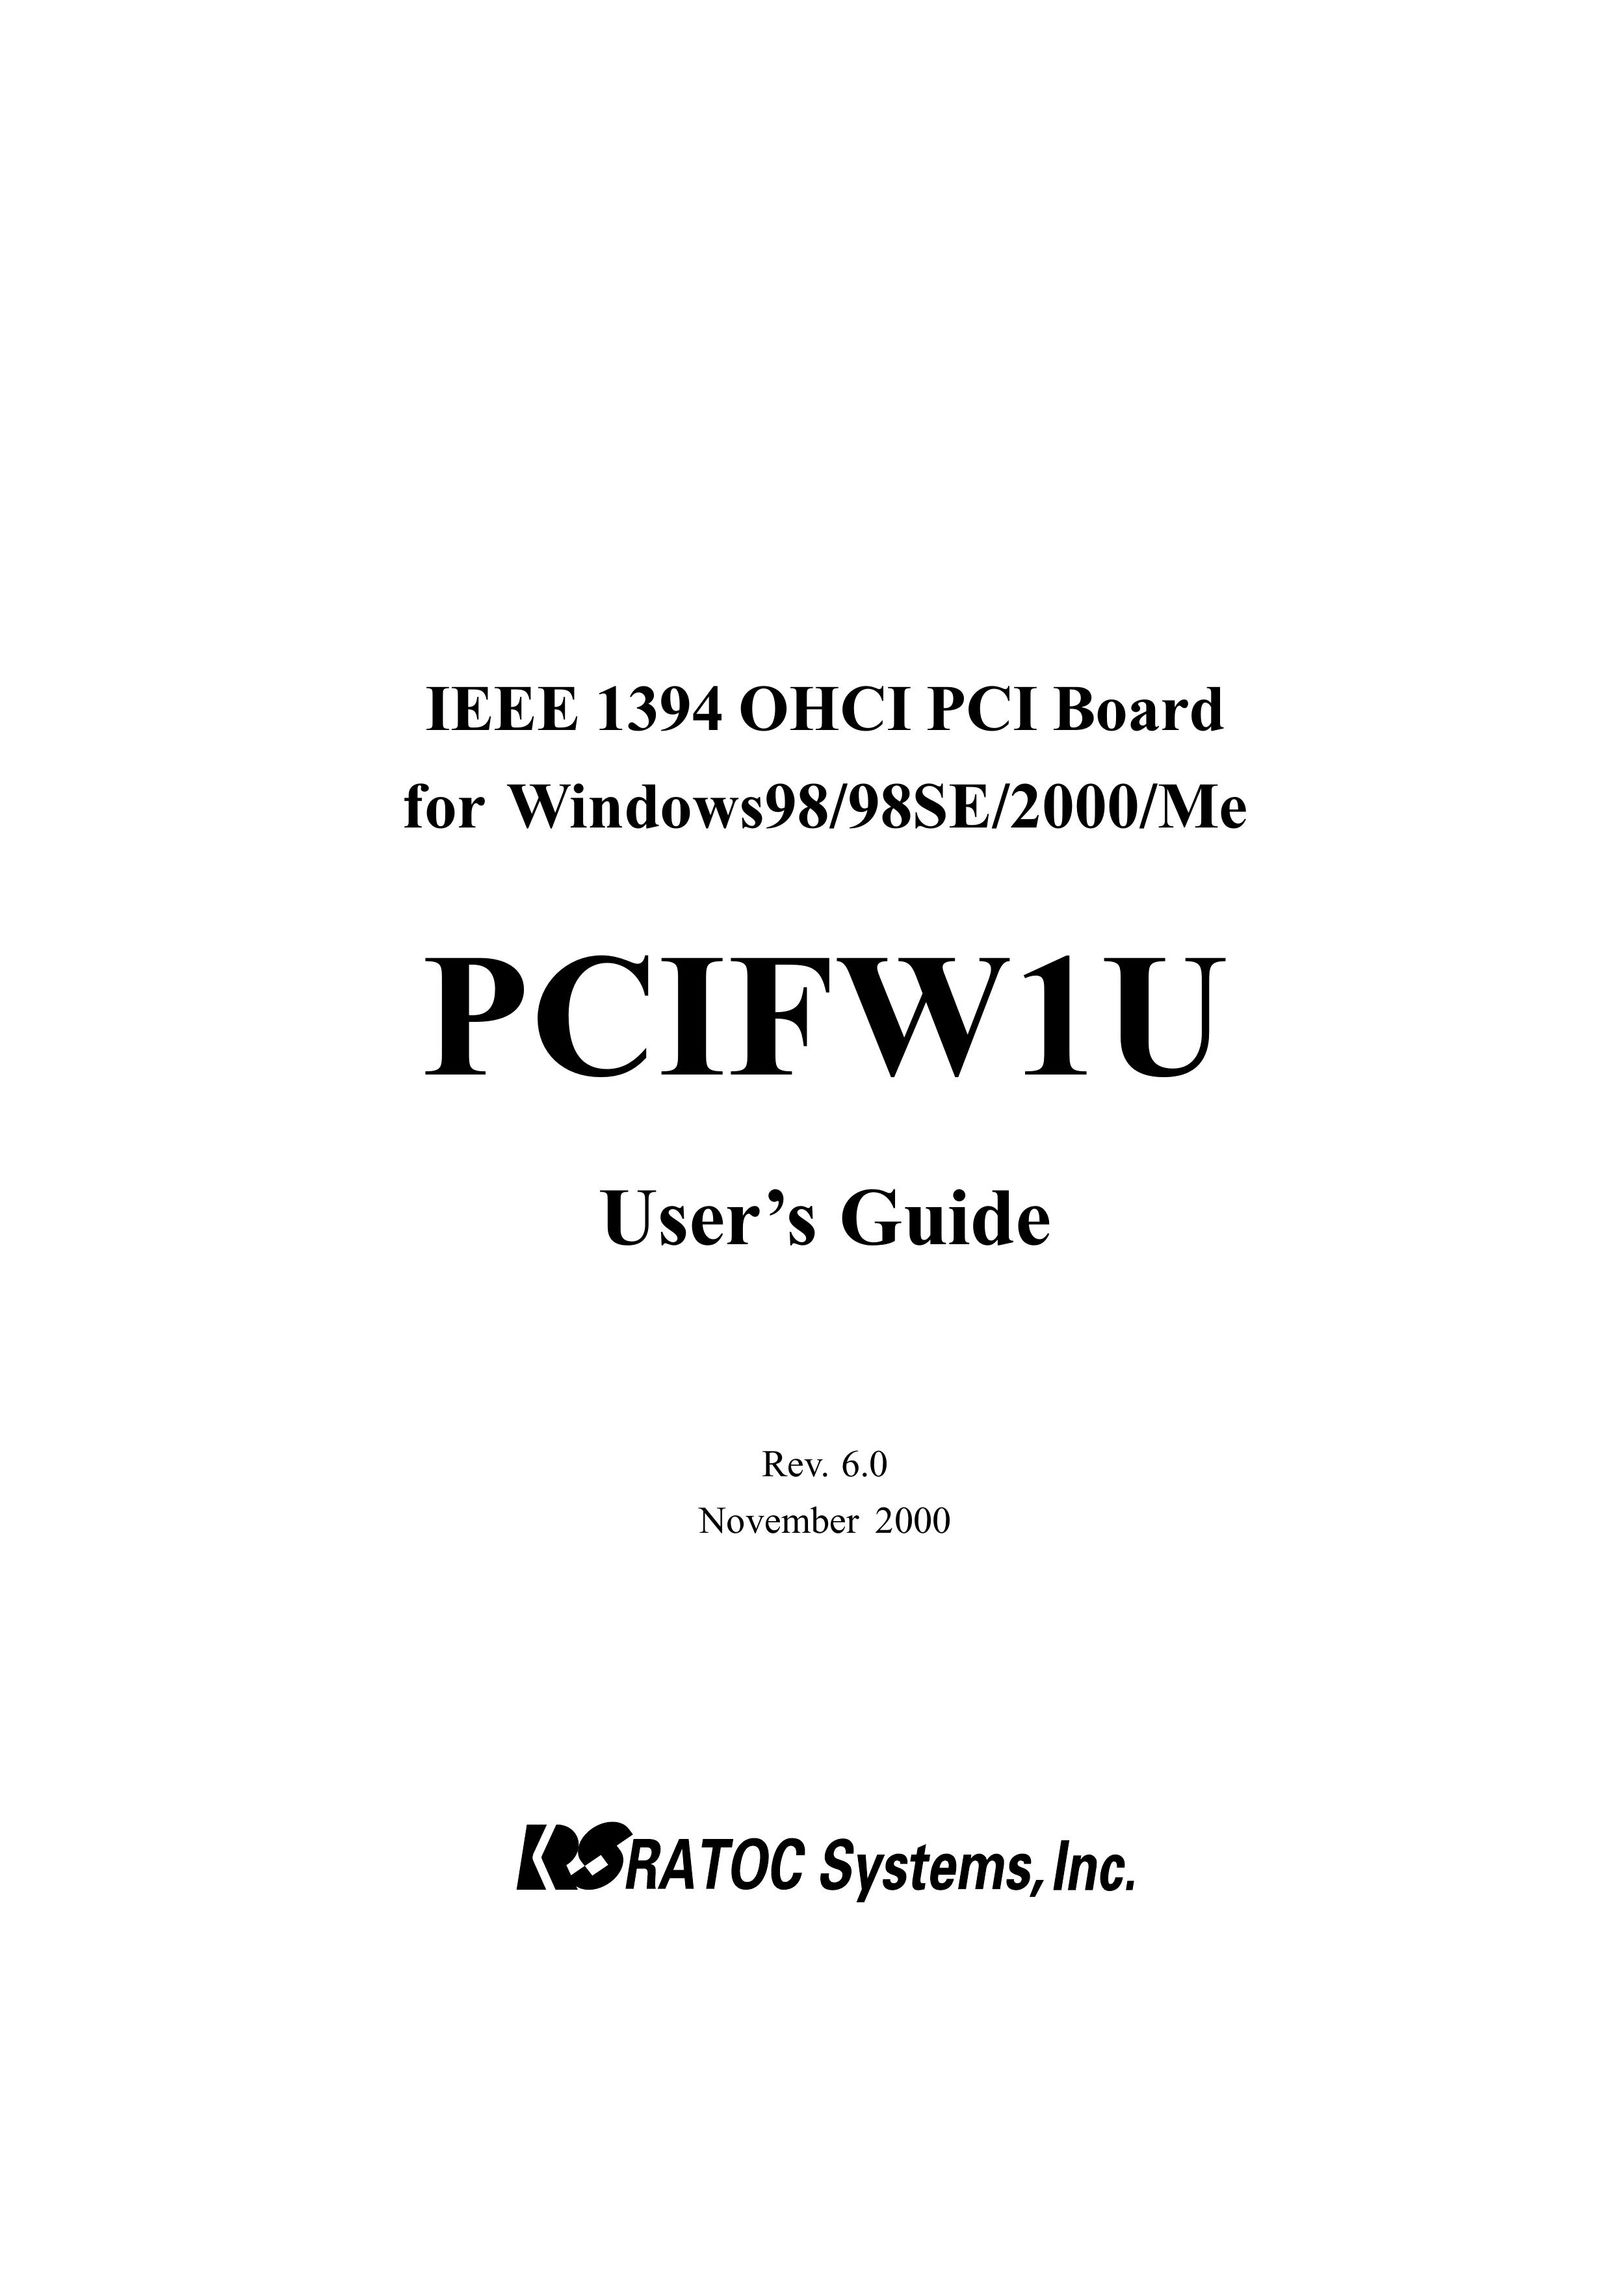 Ratoc Systems PCIFW1U Switch User Manual